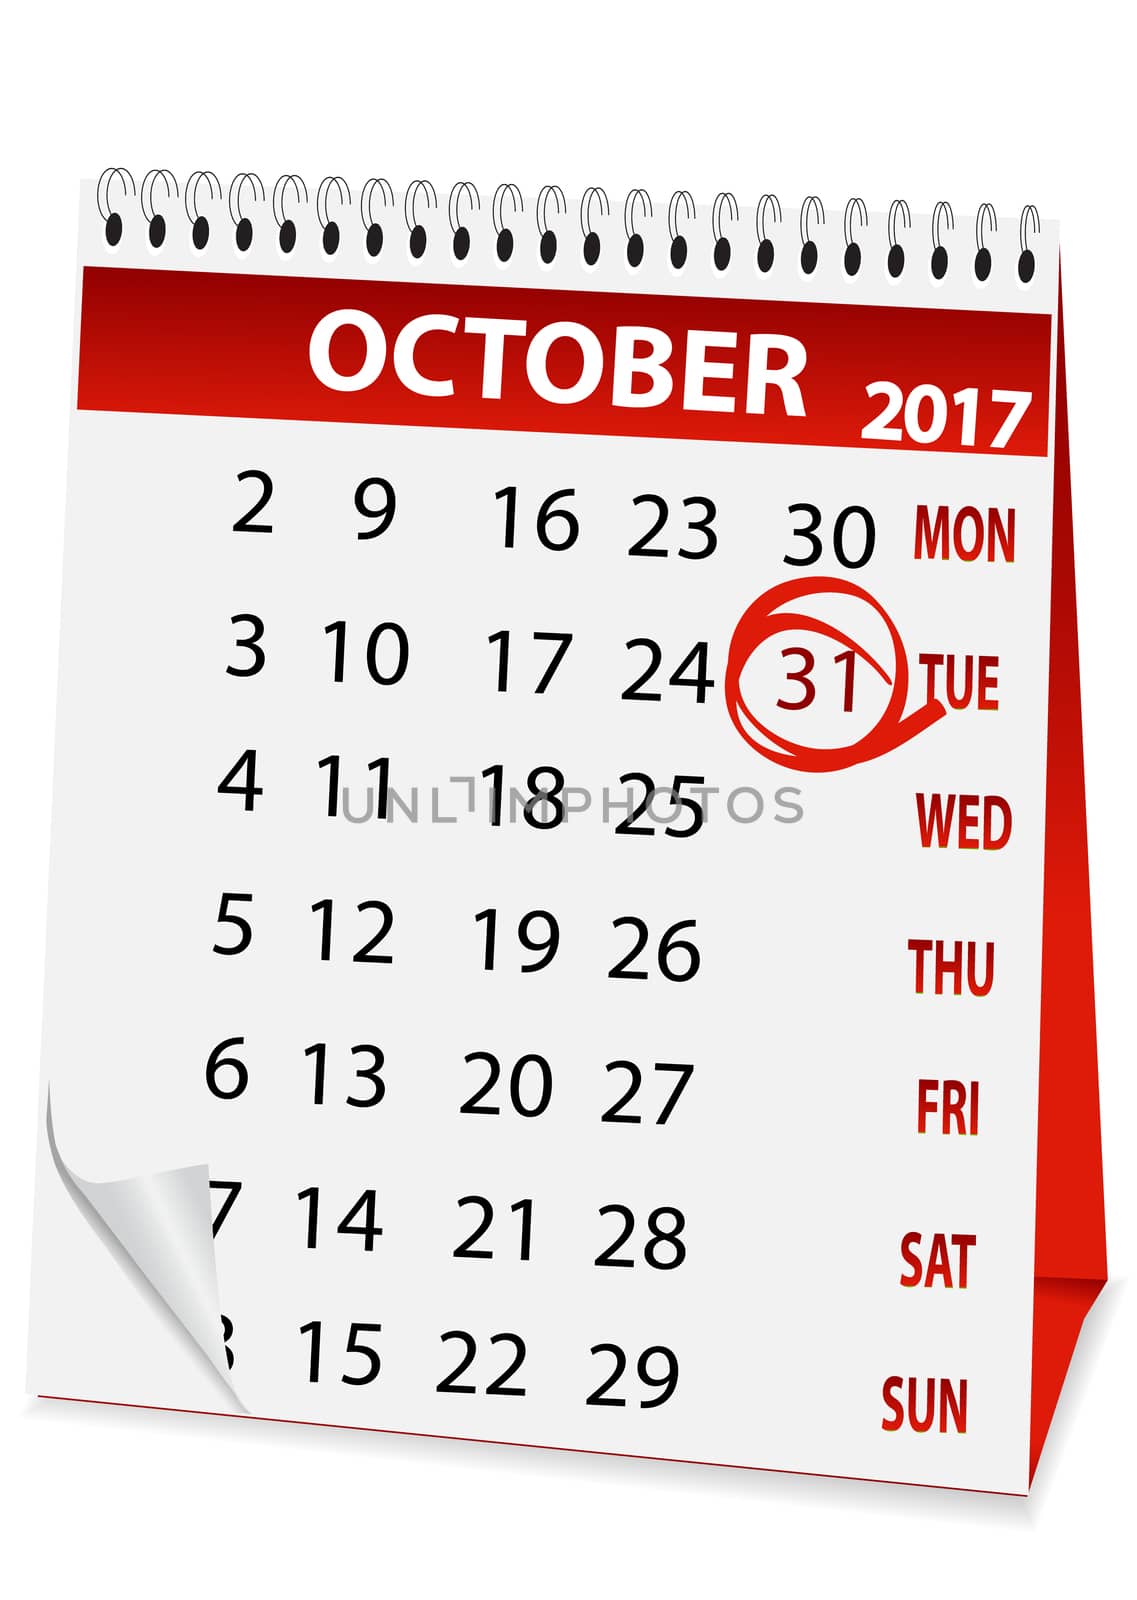 icon in the form of a calendar for Halloween